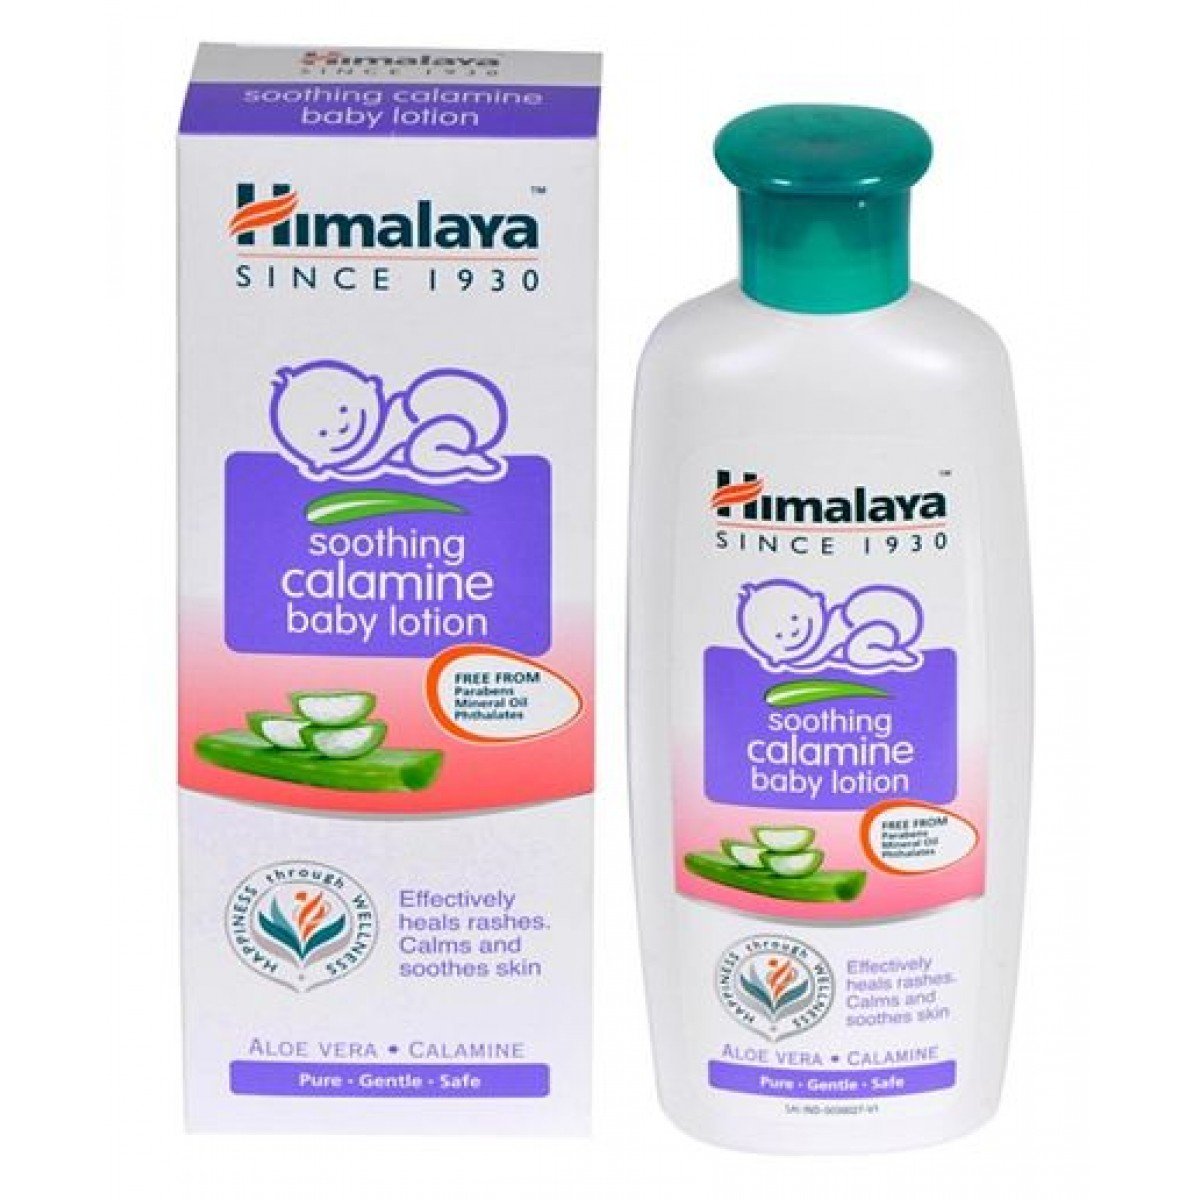 Calamine Lotion For Babies : Calamine Lotion For Babies Eczema